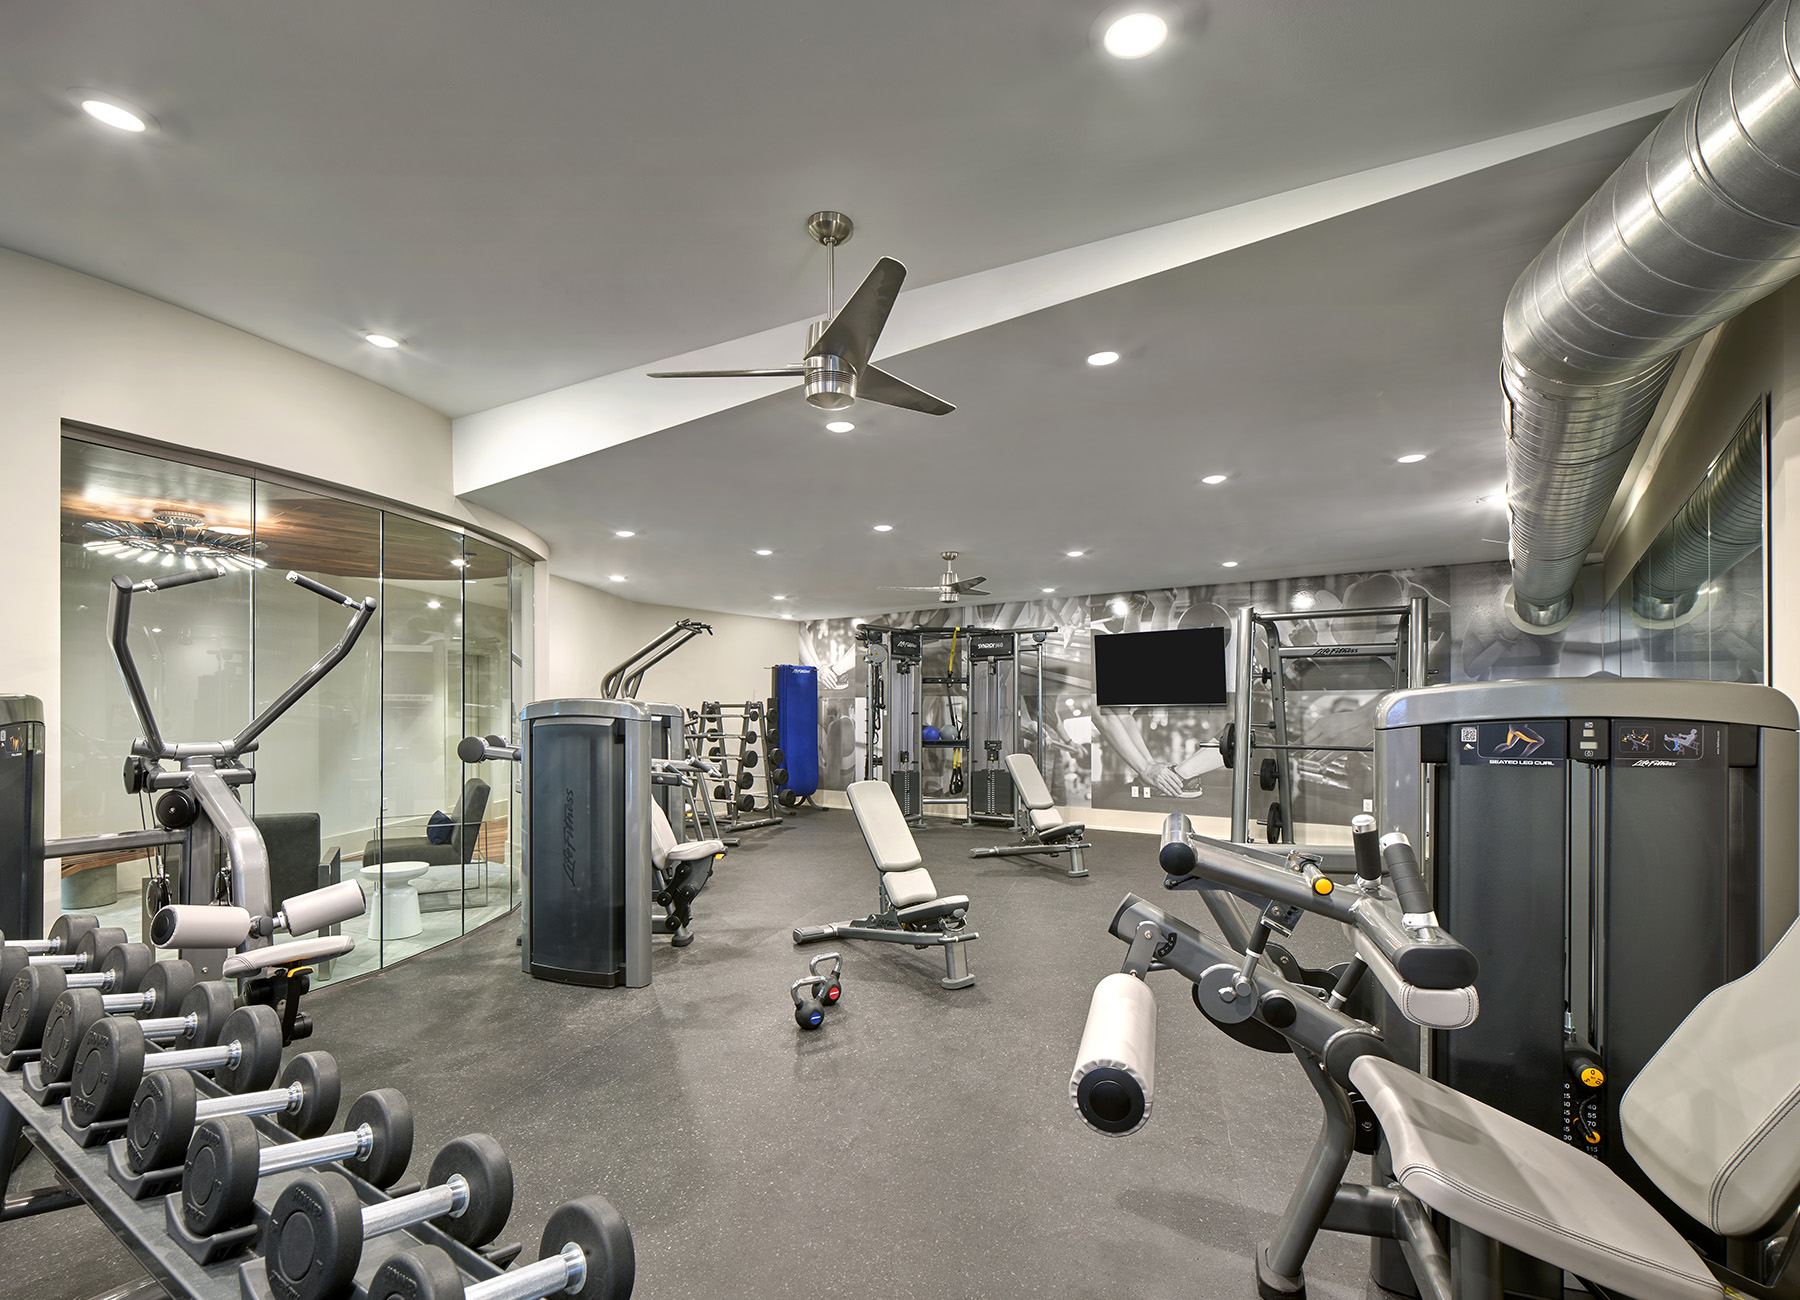 Modern fitness facility with cardio machines, free weights, and tvs